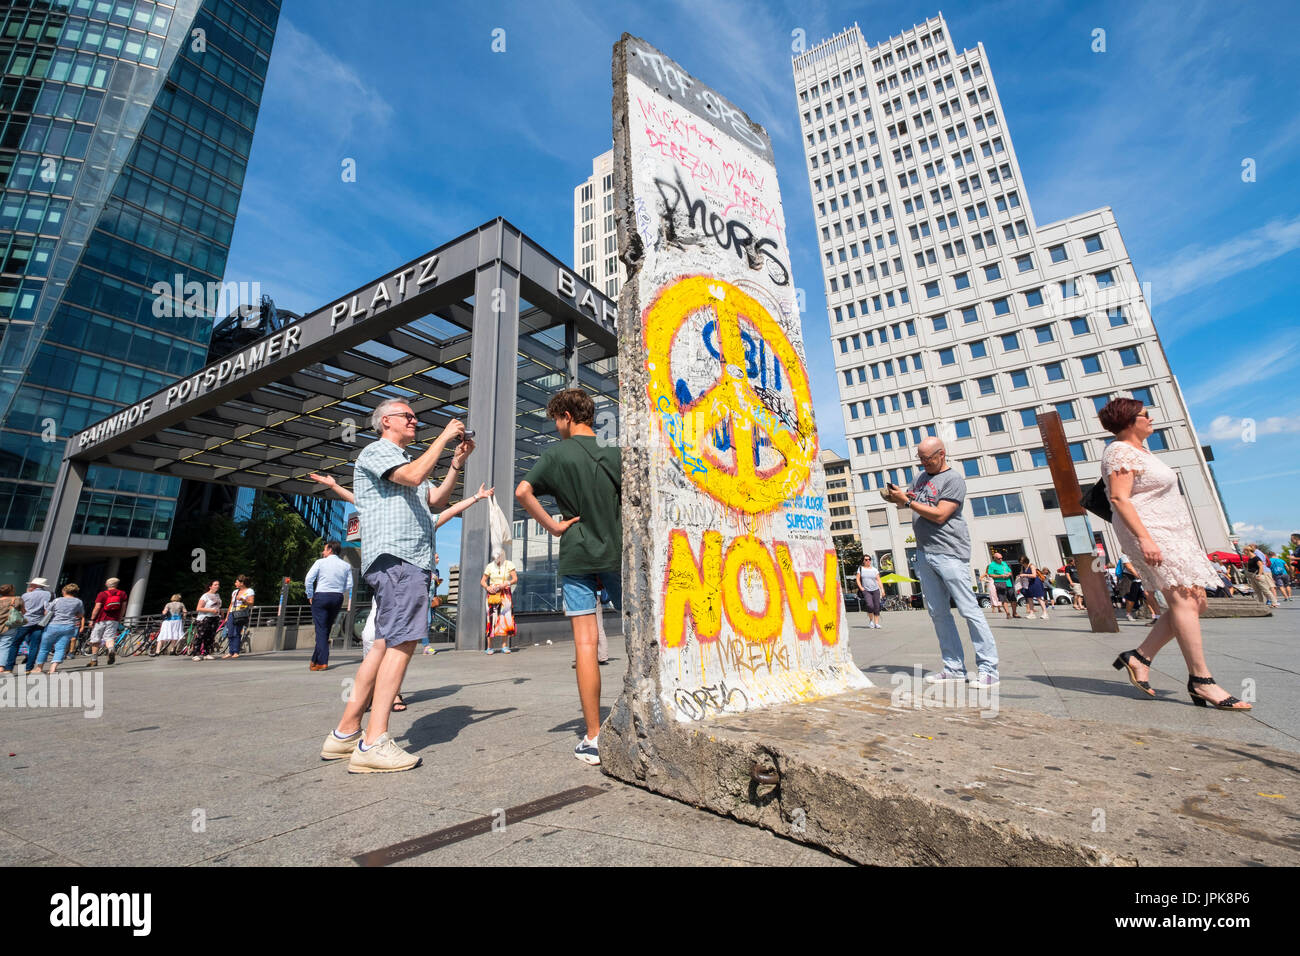 View of busy square at Potsdamer Platz business and entertainment district in Berlin, Germany Stock Photo